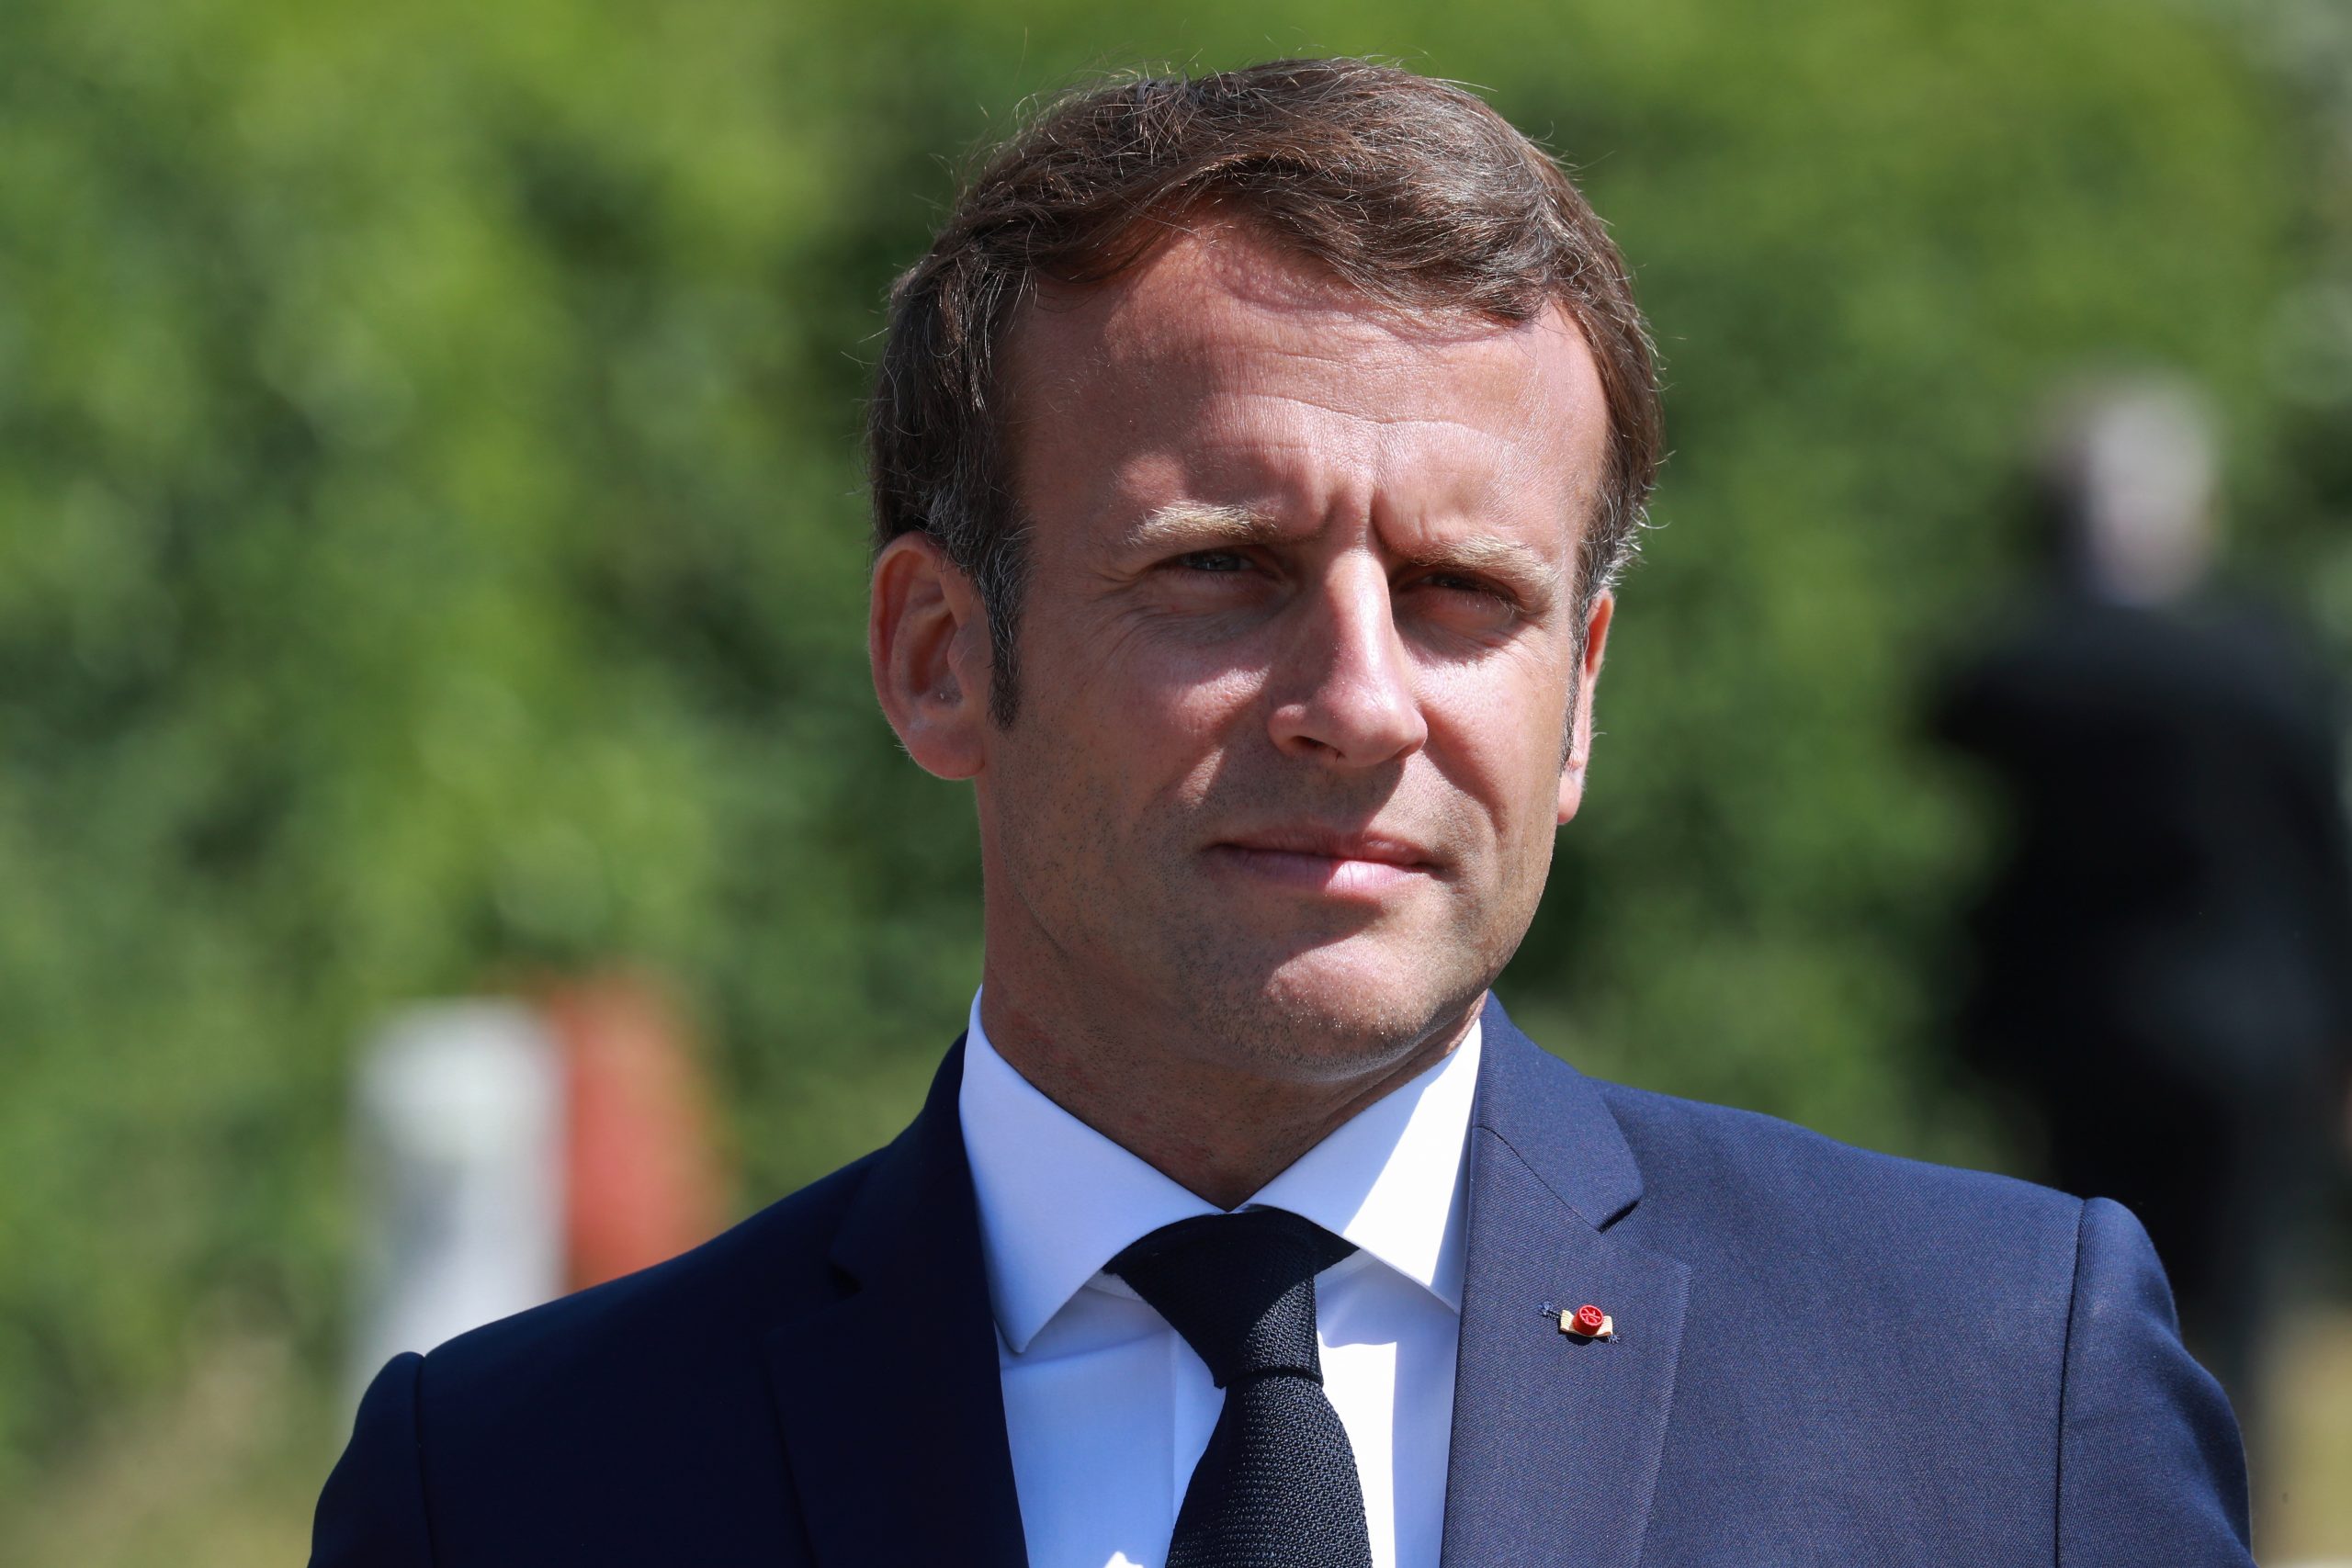 epa08445399 French President Emmanuel Macron arrives to visit a factory of manufacturer Valeo in Etaples, near Le Touquet, northern France, 26 May 2020 as part of the launch of a plan to rescue the French car industry.  EPA/LUDOVIC MARIN / POOL  MAXPPP OUT